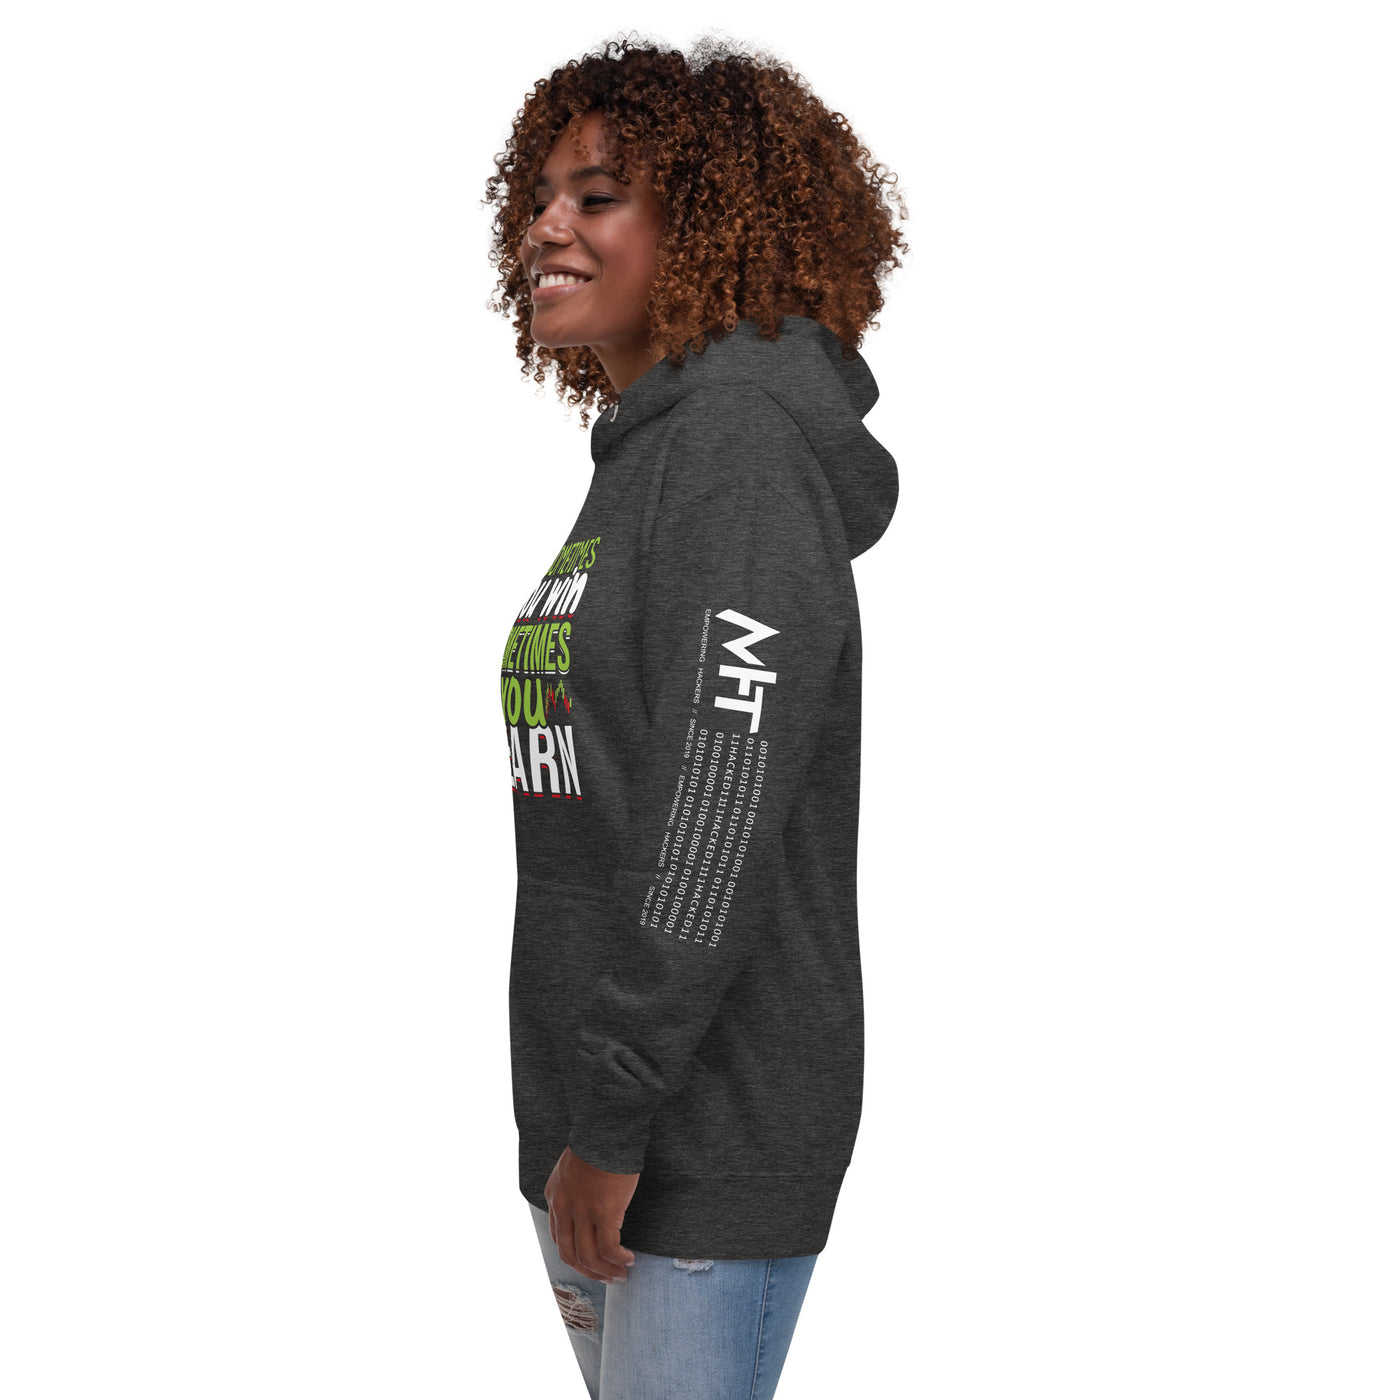 Sometimes you Win, sometimes you Learn - Unisex Hoodie